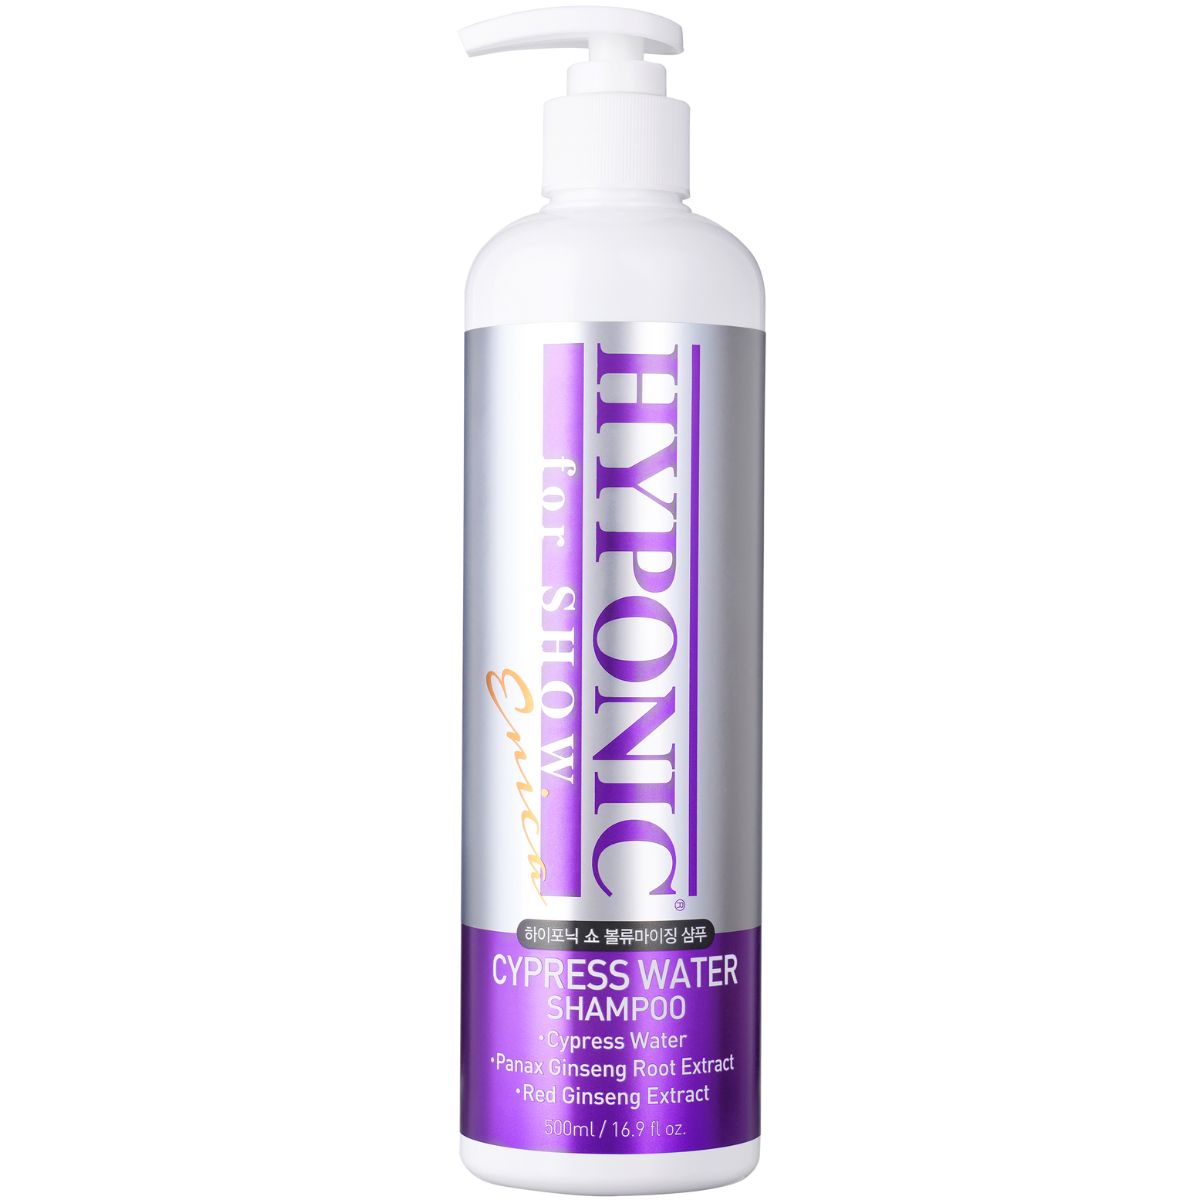 Hyponic for Show, Cypress Water Shampoo